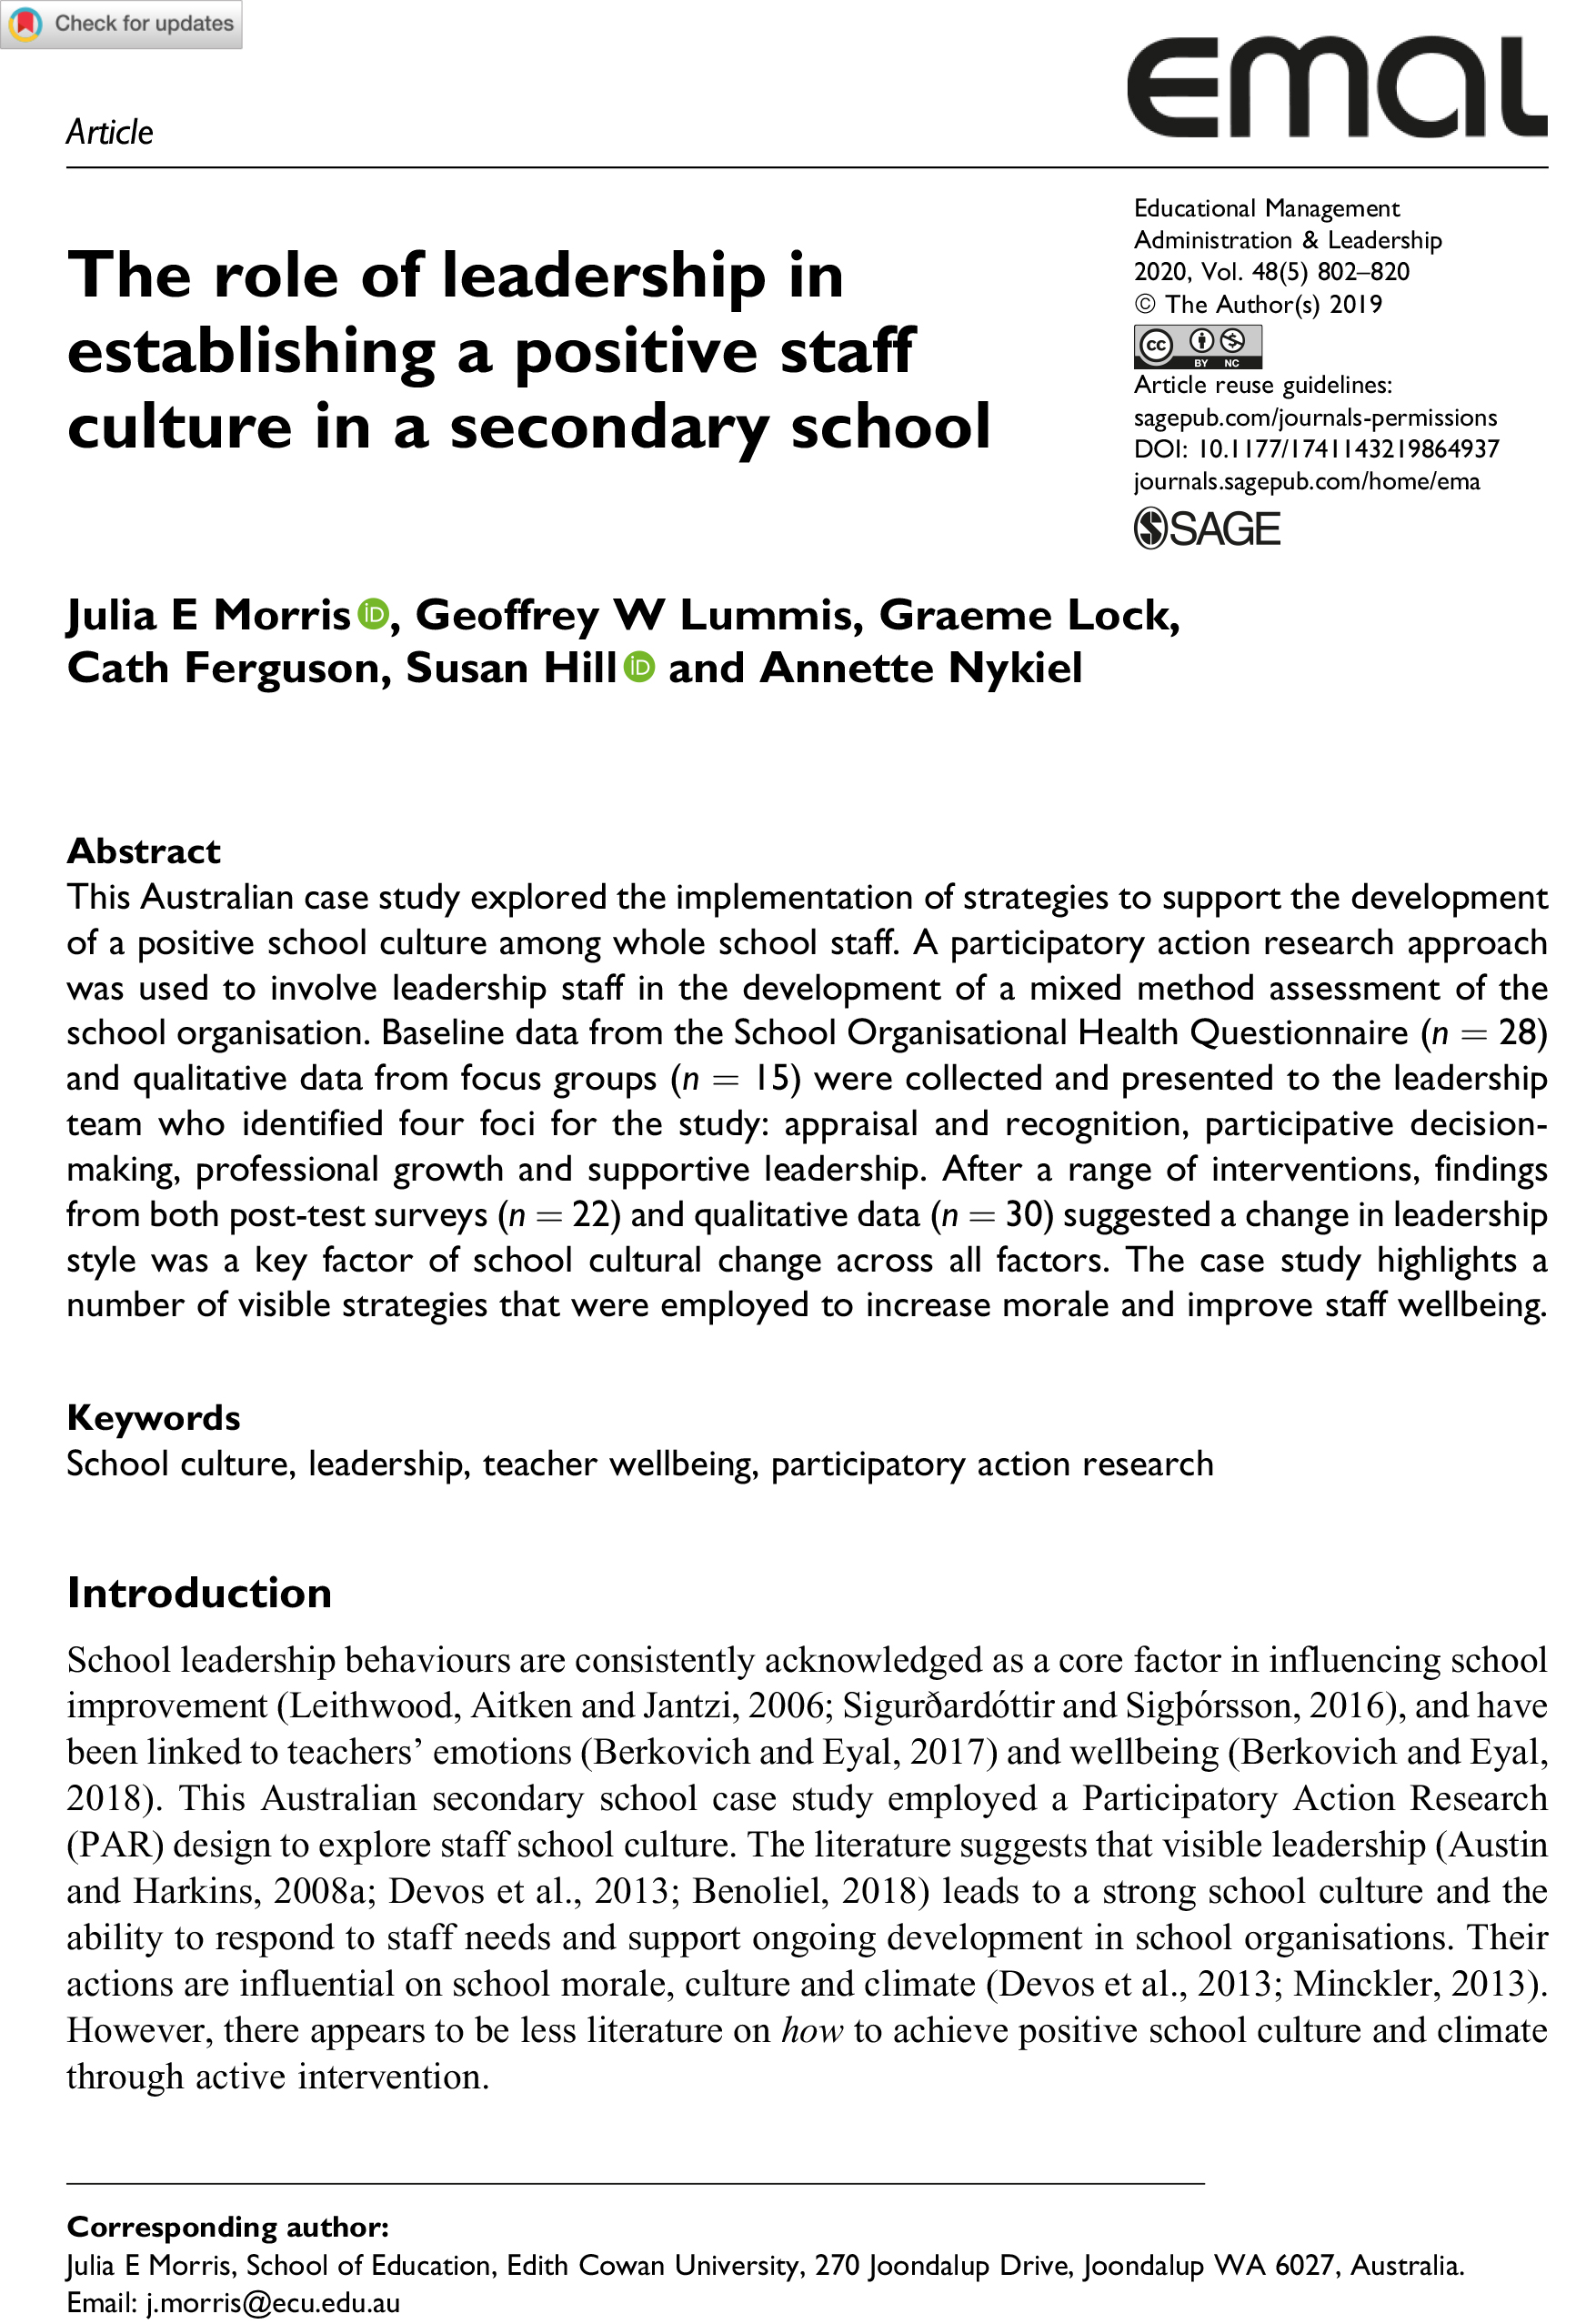 The role of leadership in establishing a positive staff culture in a secondary school